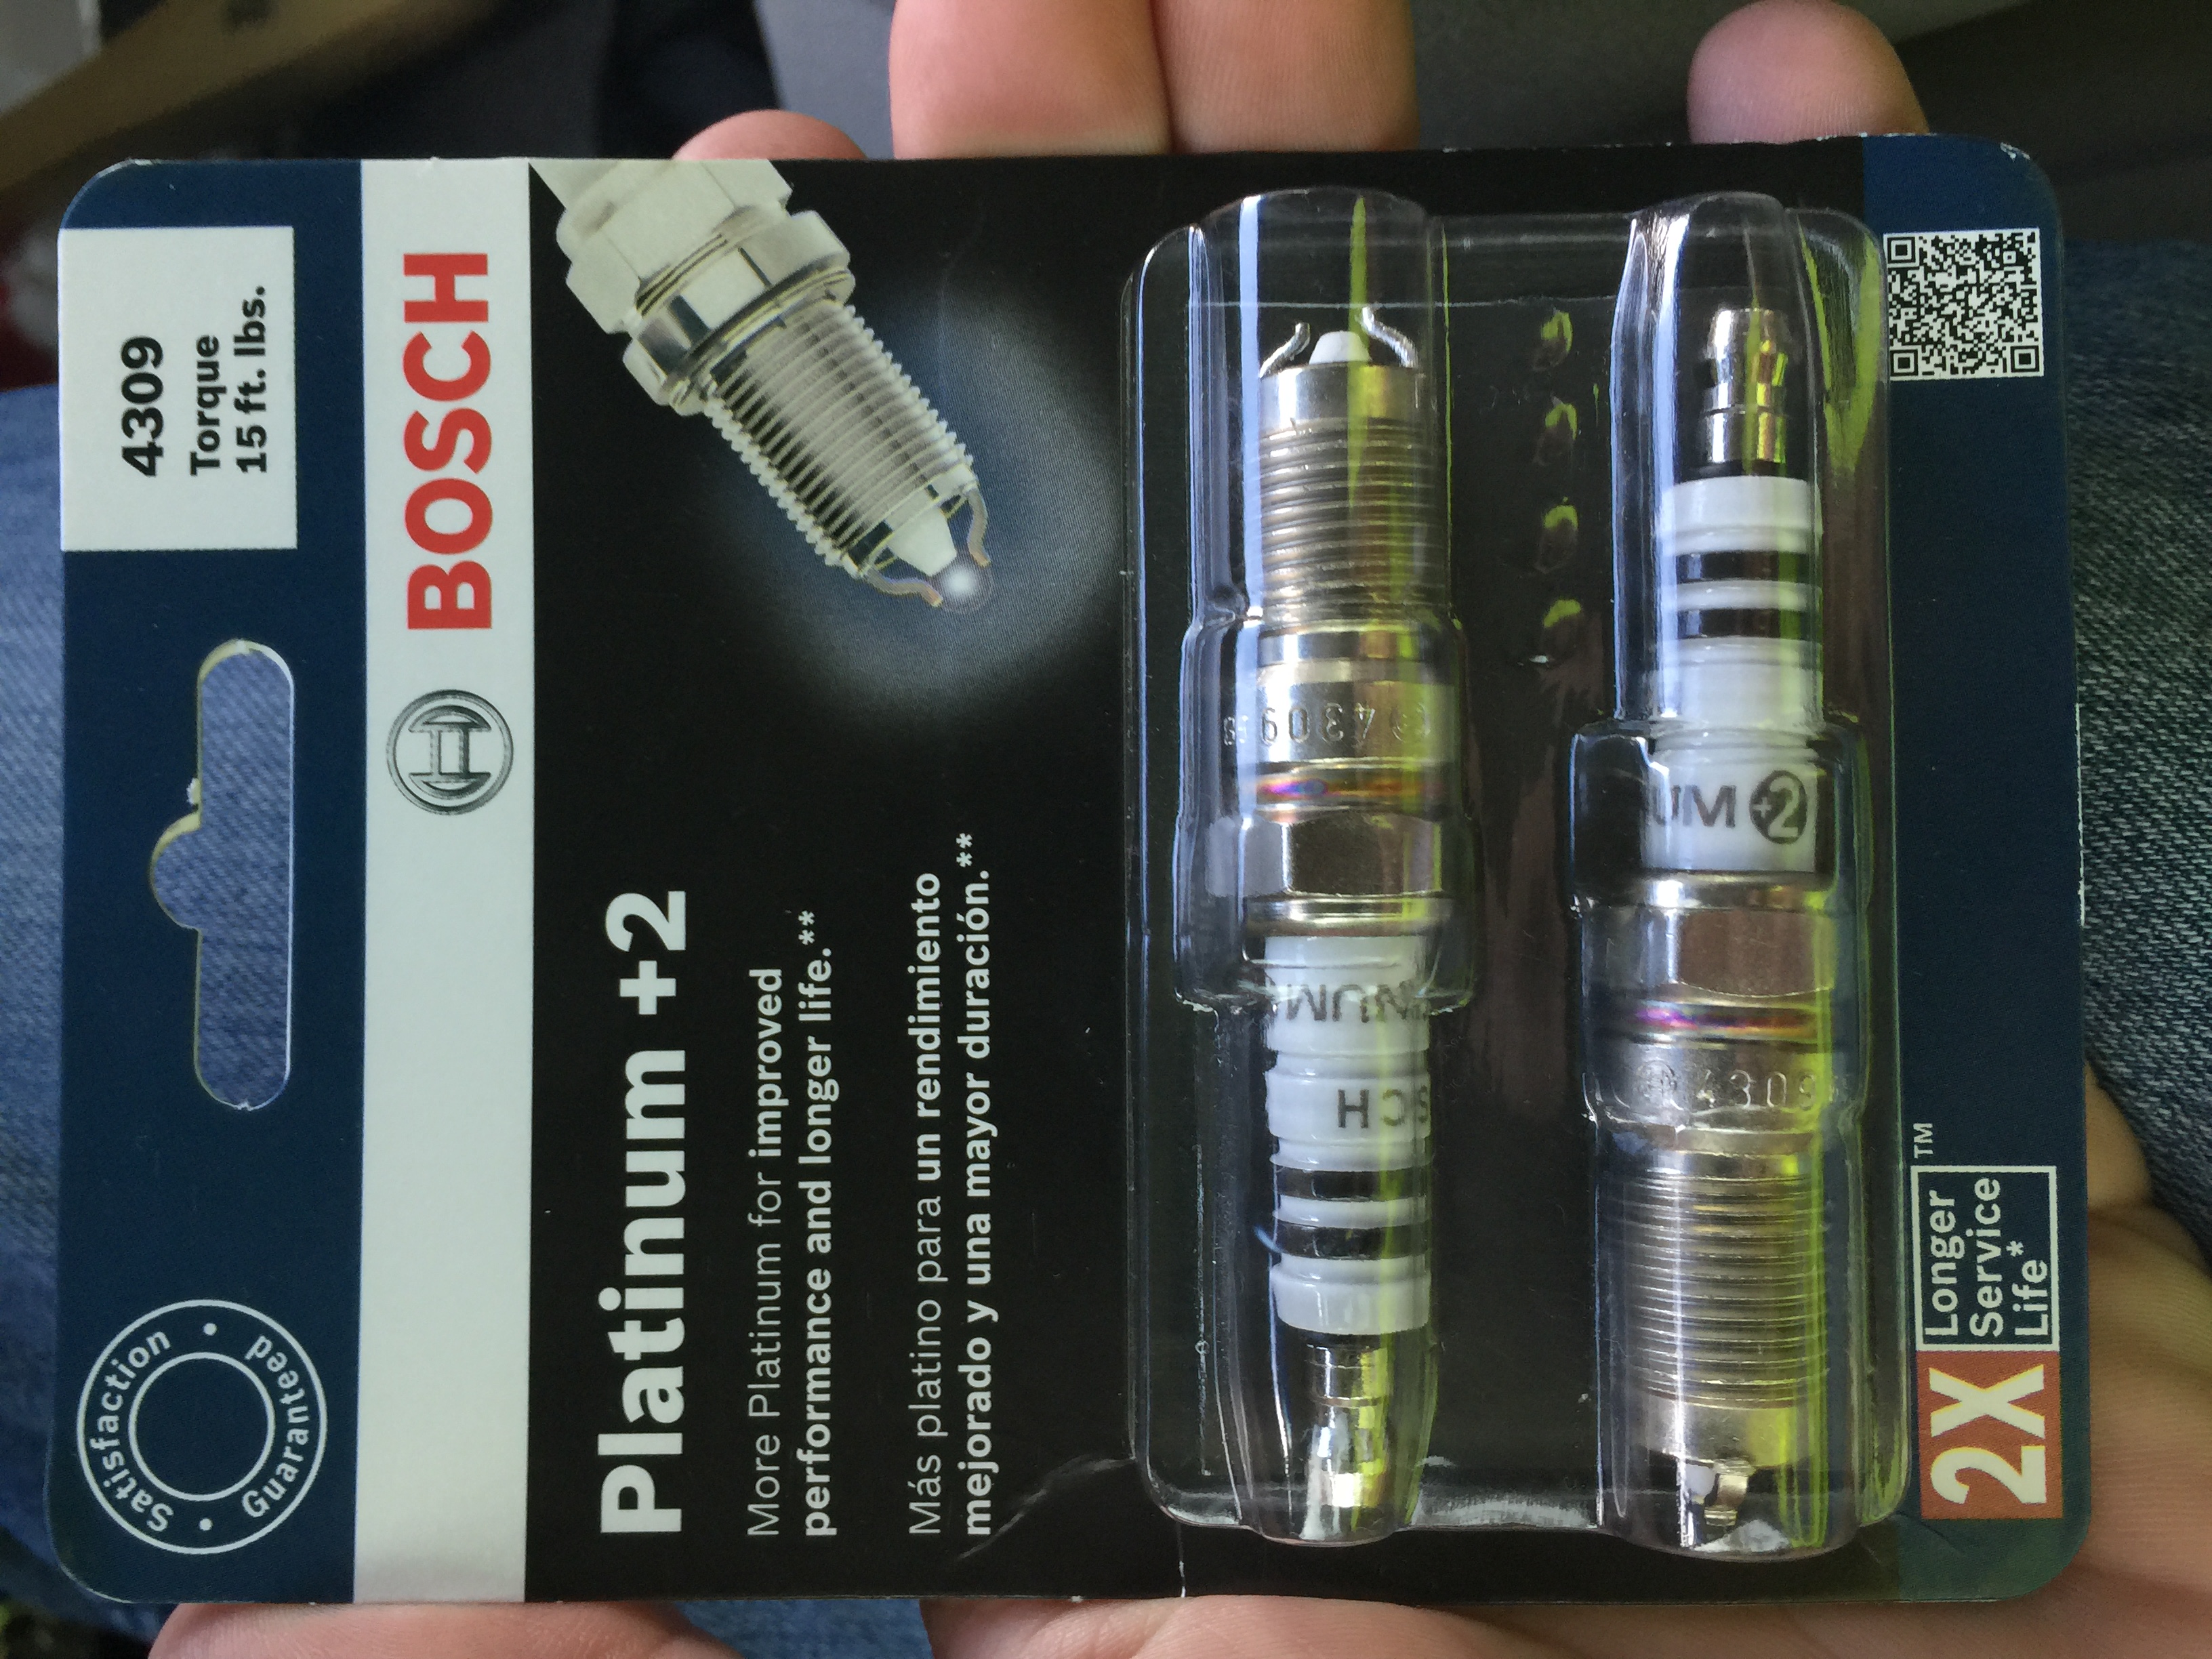 How to change spark plugs on 2007 gmc sierra #3